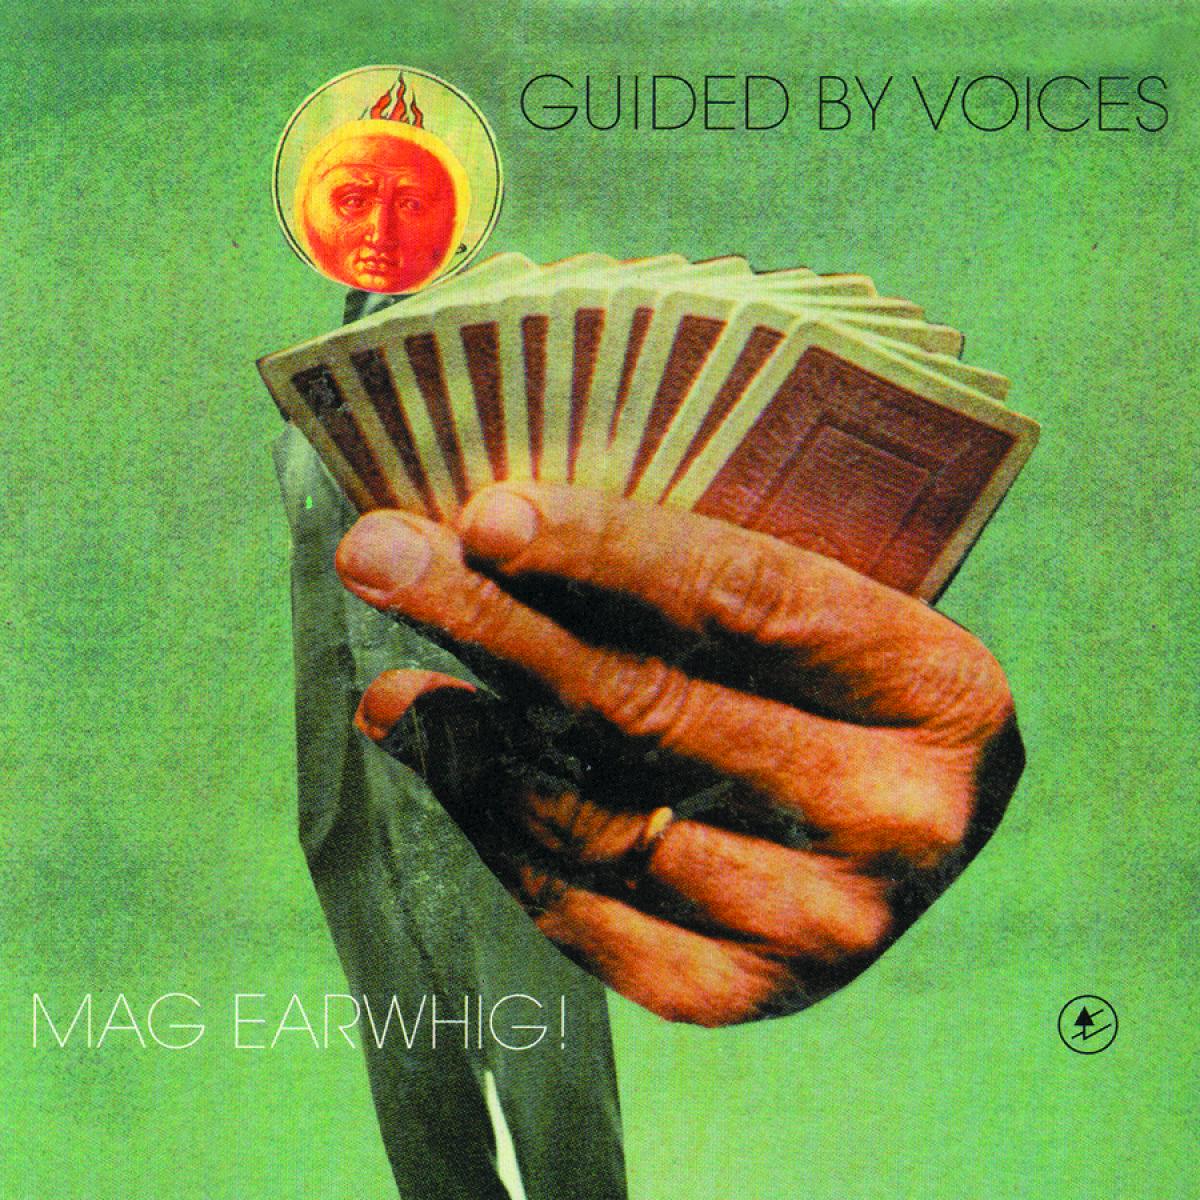 Guided by Voices - Mag Earwhig - 744861024118 - LP's - Yellow Racket Records